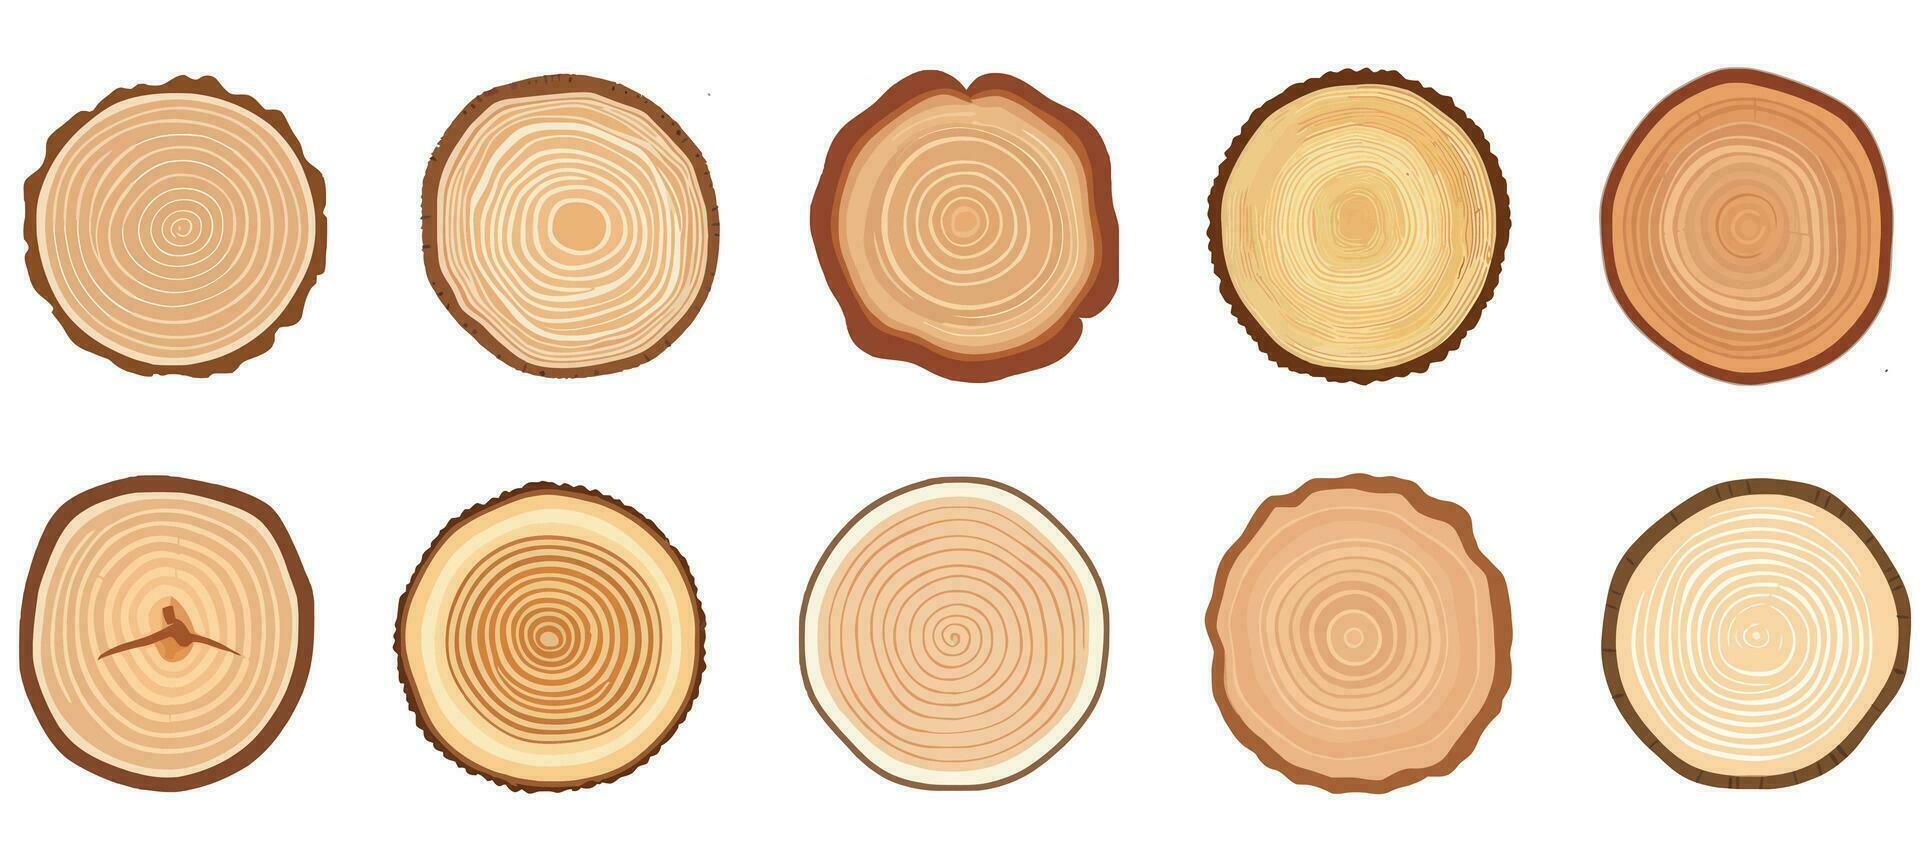 Tree trunk cross section set. Tree rings, tree trunk rings isolated, wood ring circle texture collection. vector